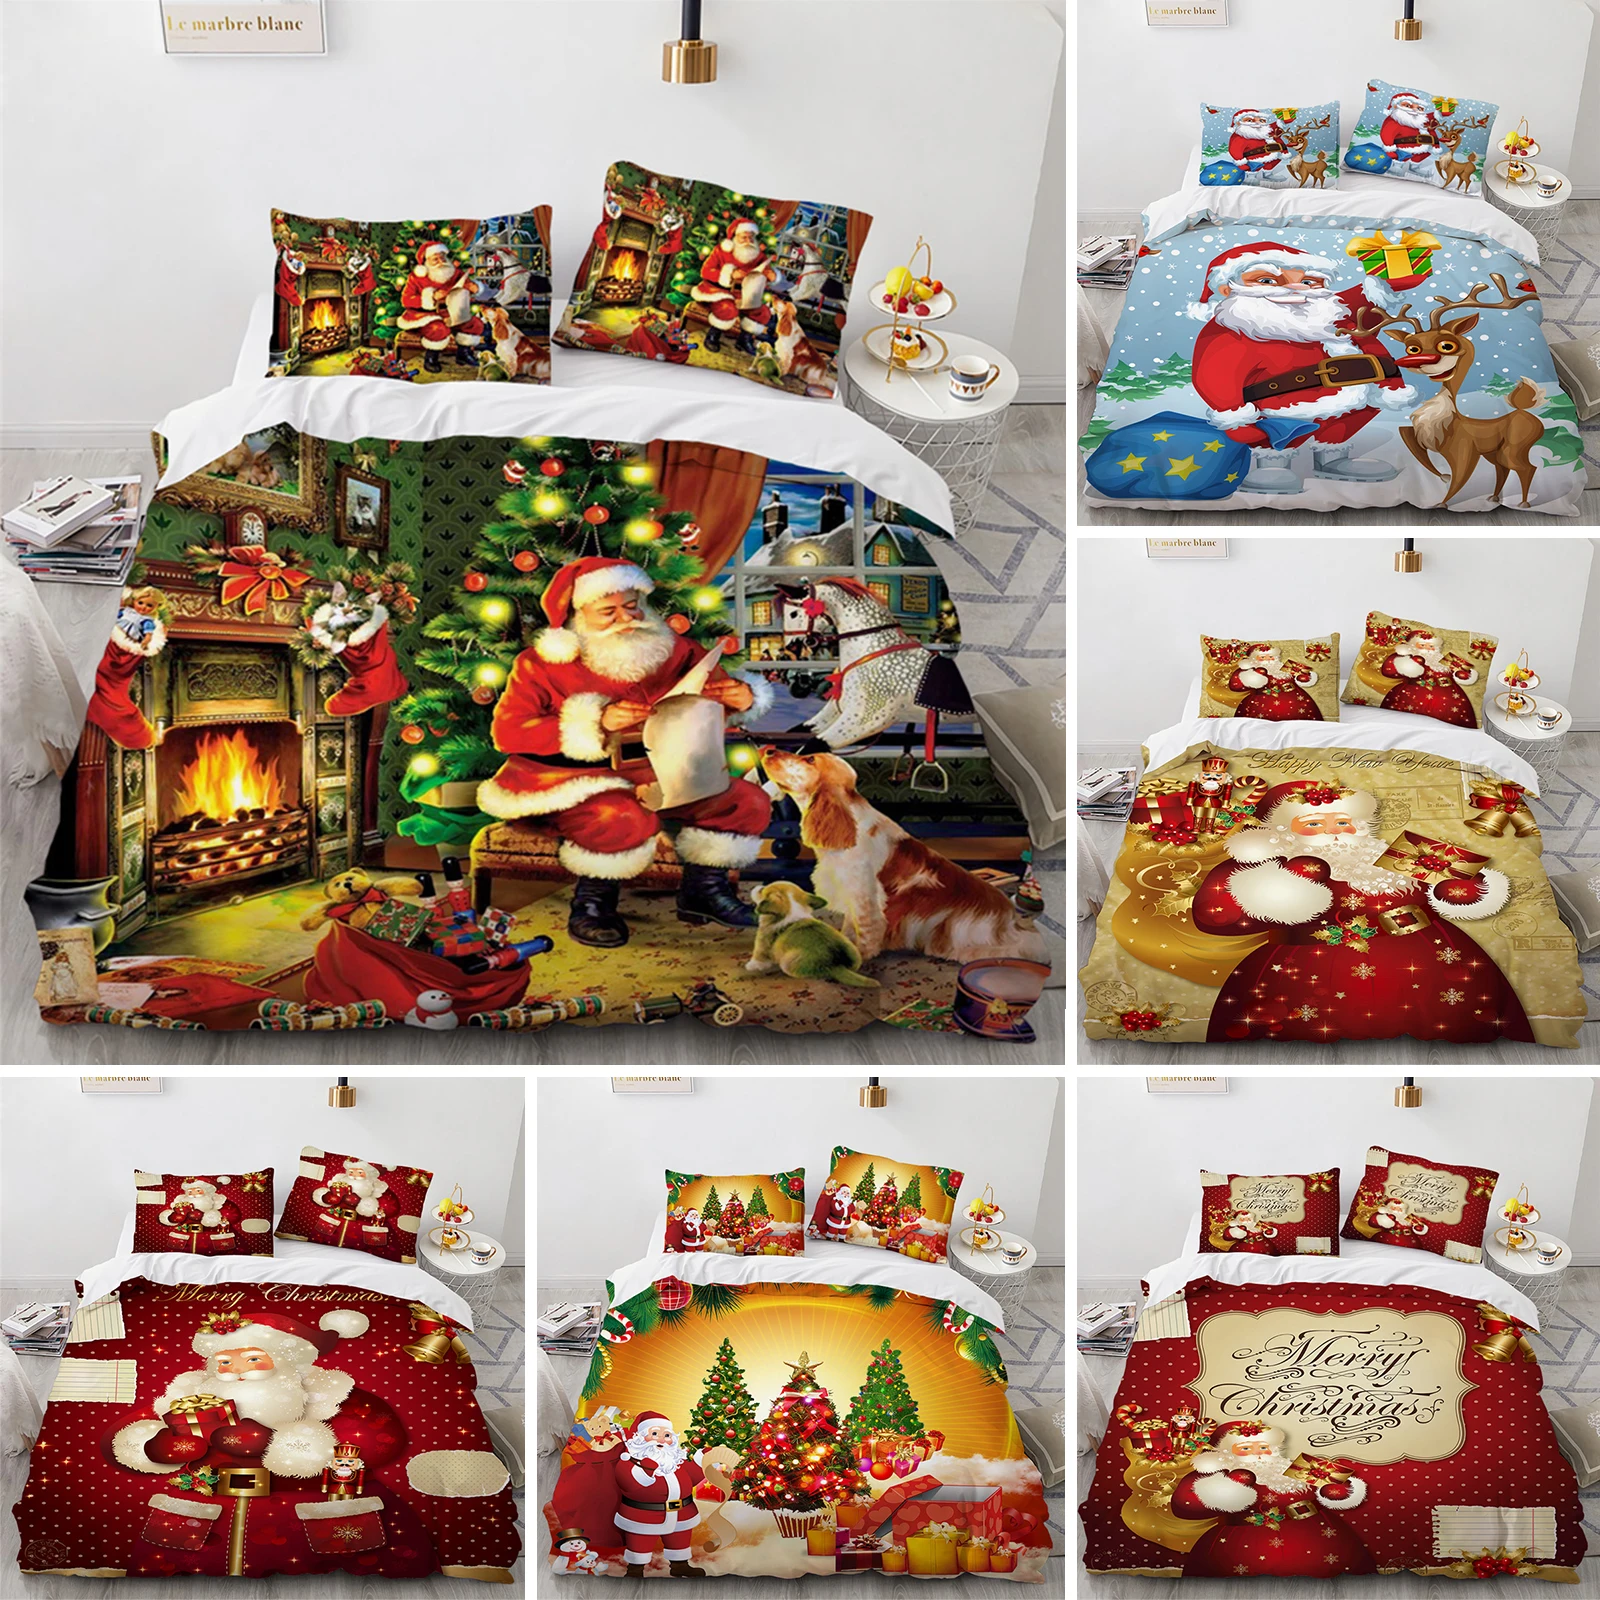 

Christmas Duvet Cover Microfiber Santa Claus Comforter Cover Cartoon Bedding Set 2/3pcs Twin King Quilt Cover With Pillowcases